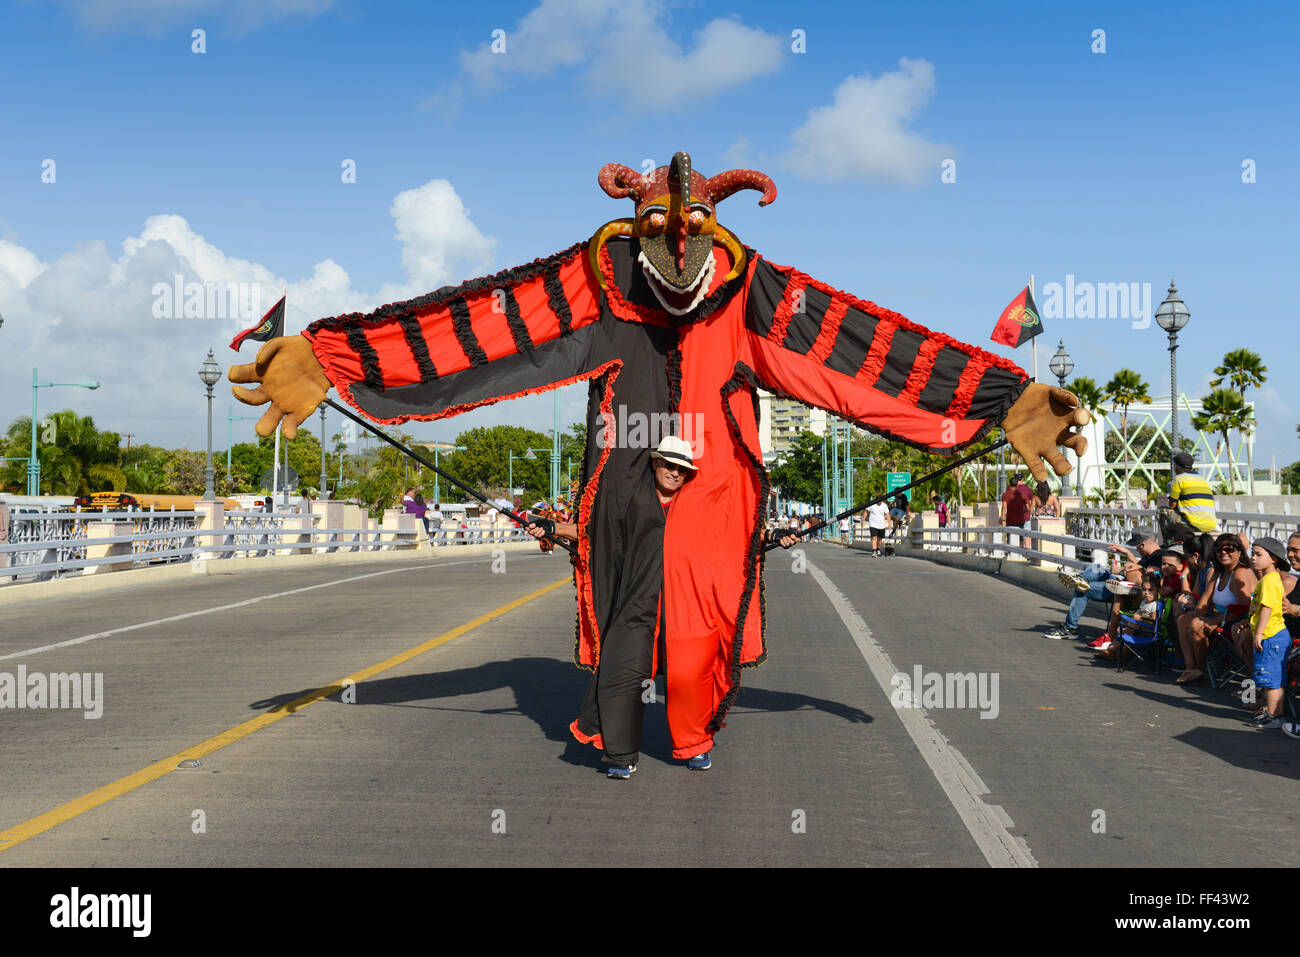 VEJIGANTE marionette like, parading during carnival in Ponce. Puerto Rico. US territory. February 2016 Stock Photo